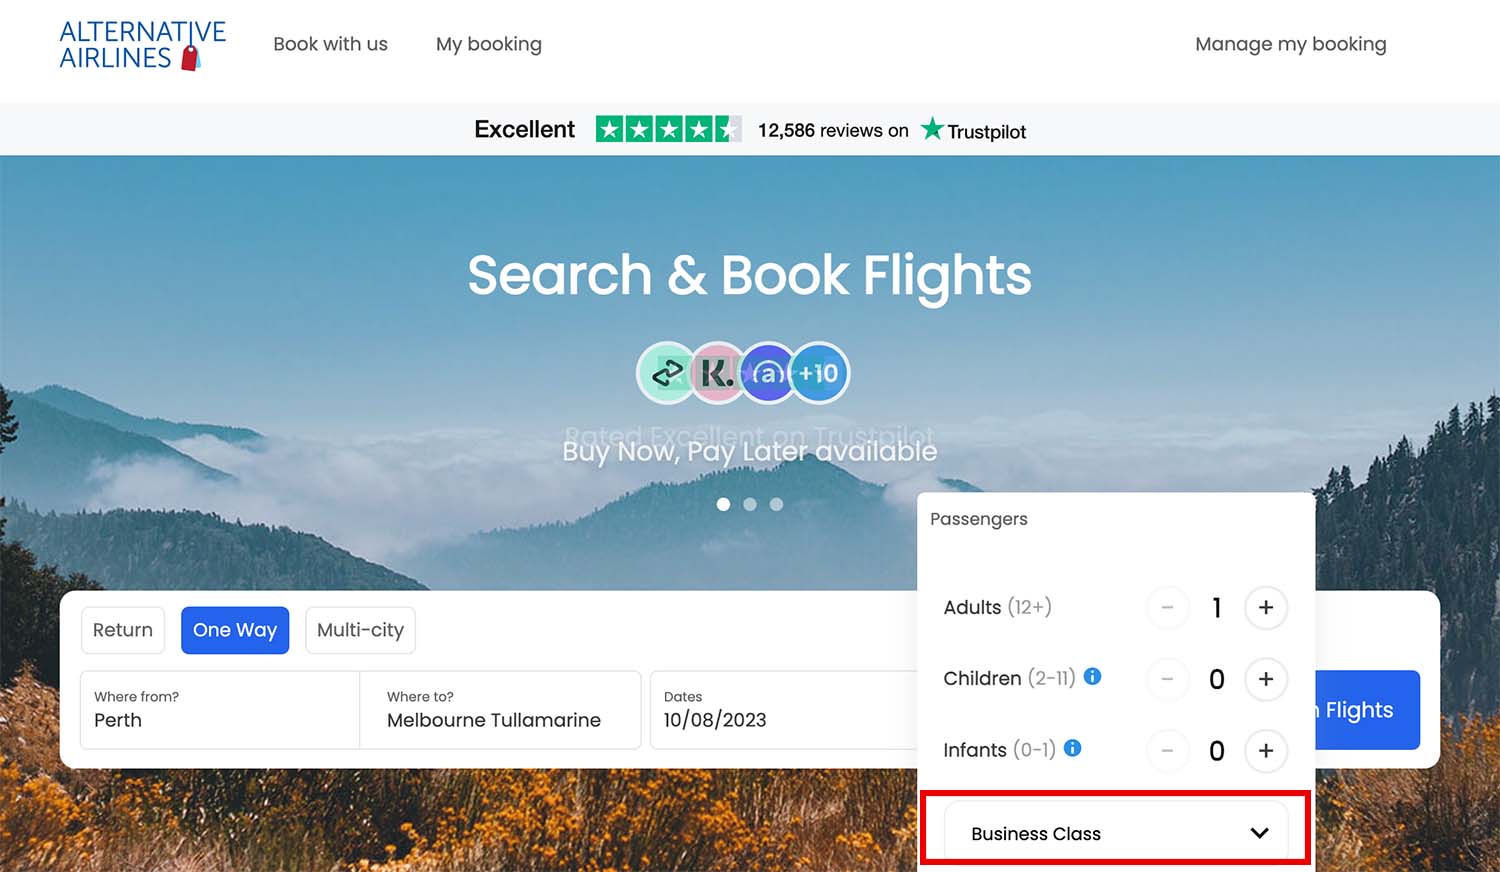 step 1 - search for flights in the search form, then select business class